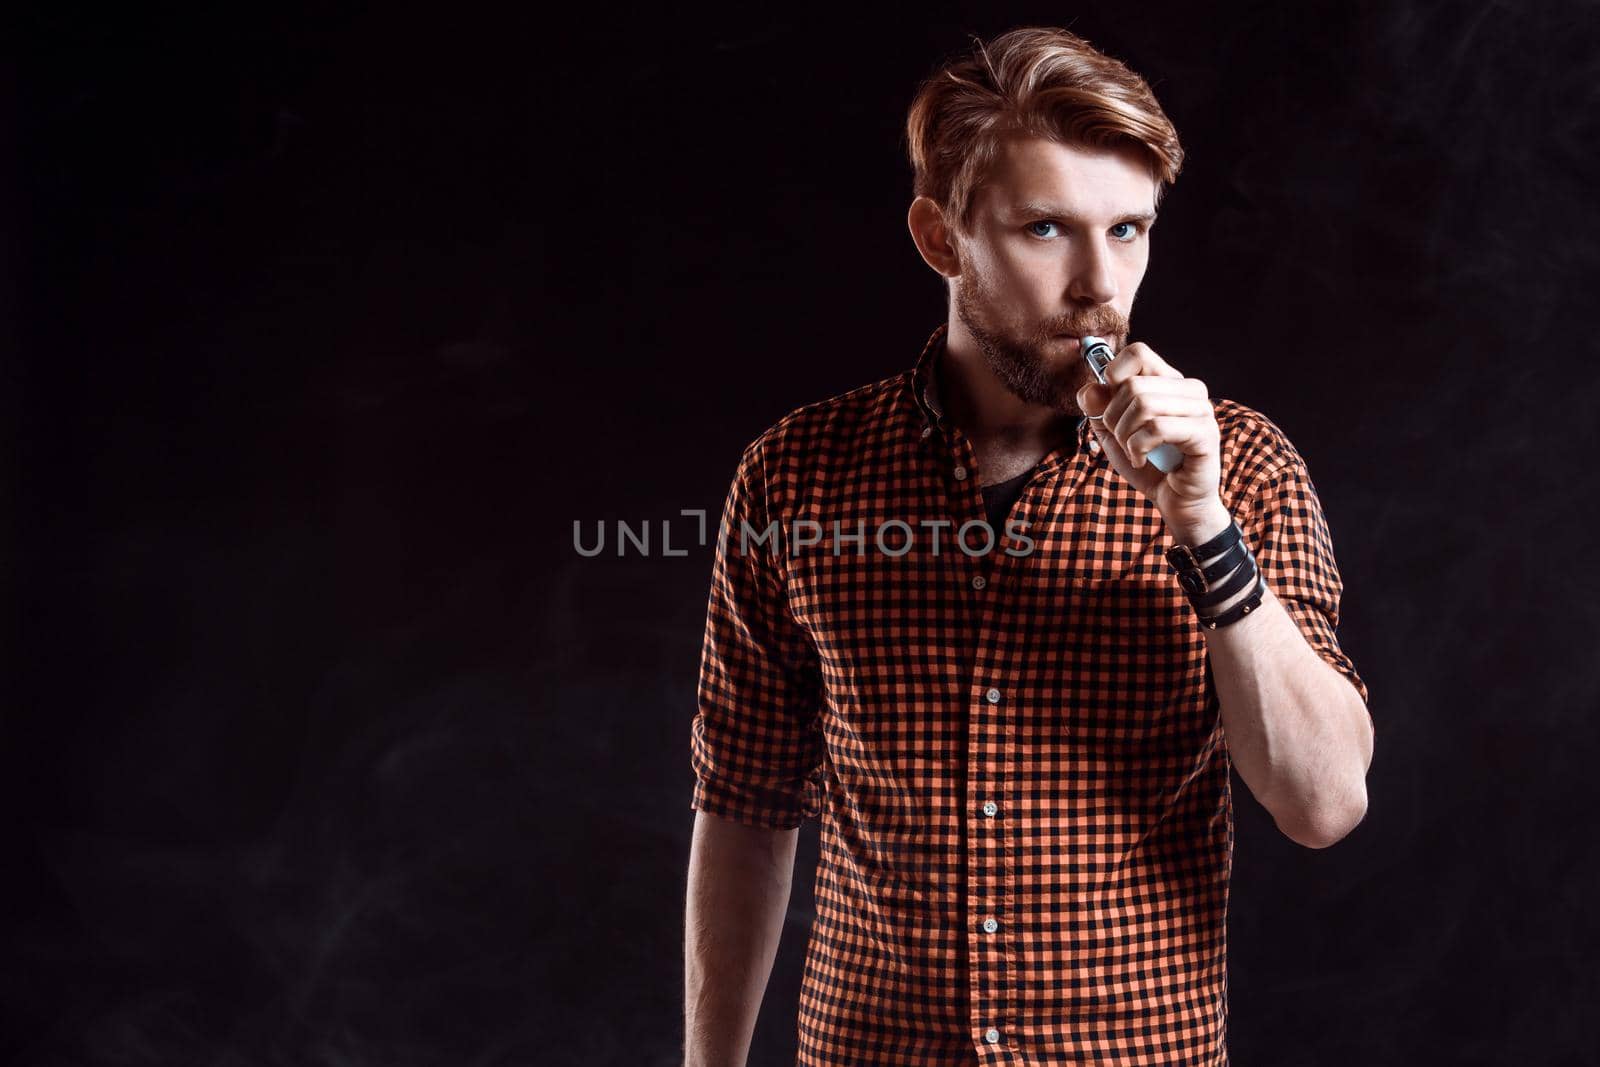 young man wearing a plaid shirt smokes an electronic cigarette on a black background. He looks into the camera